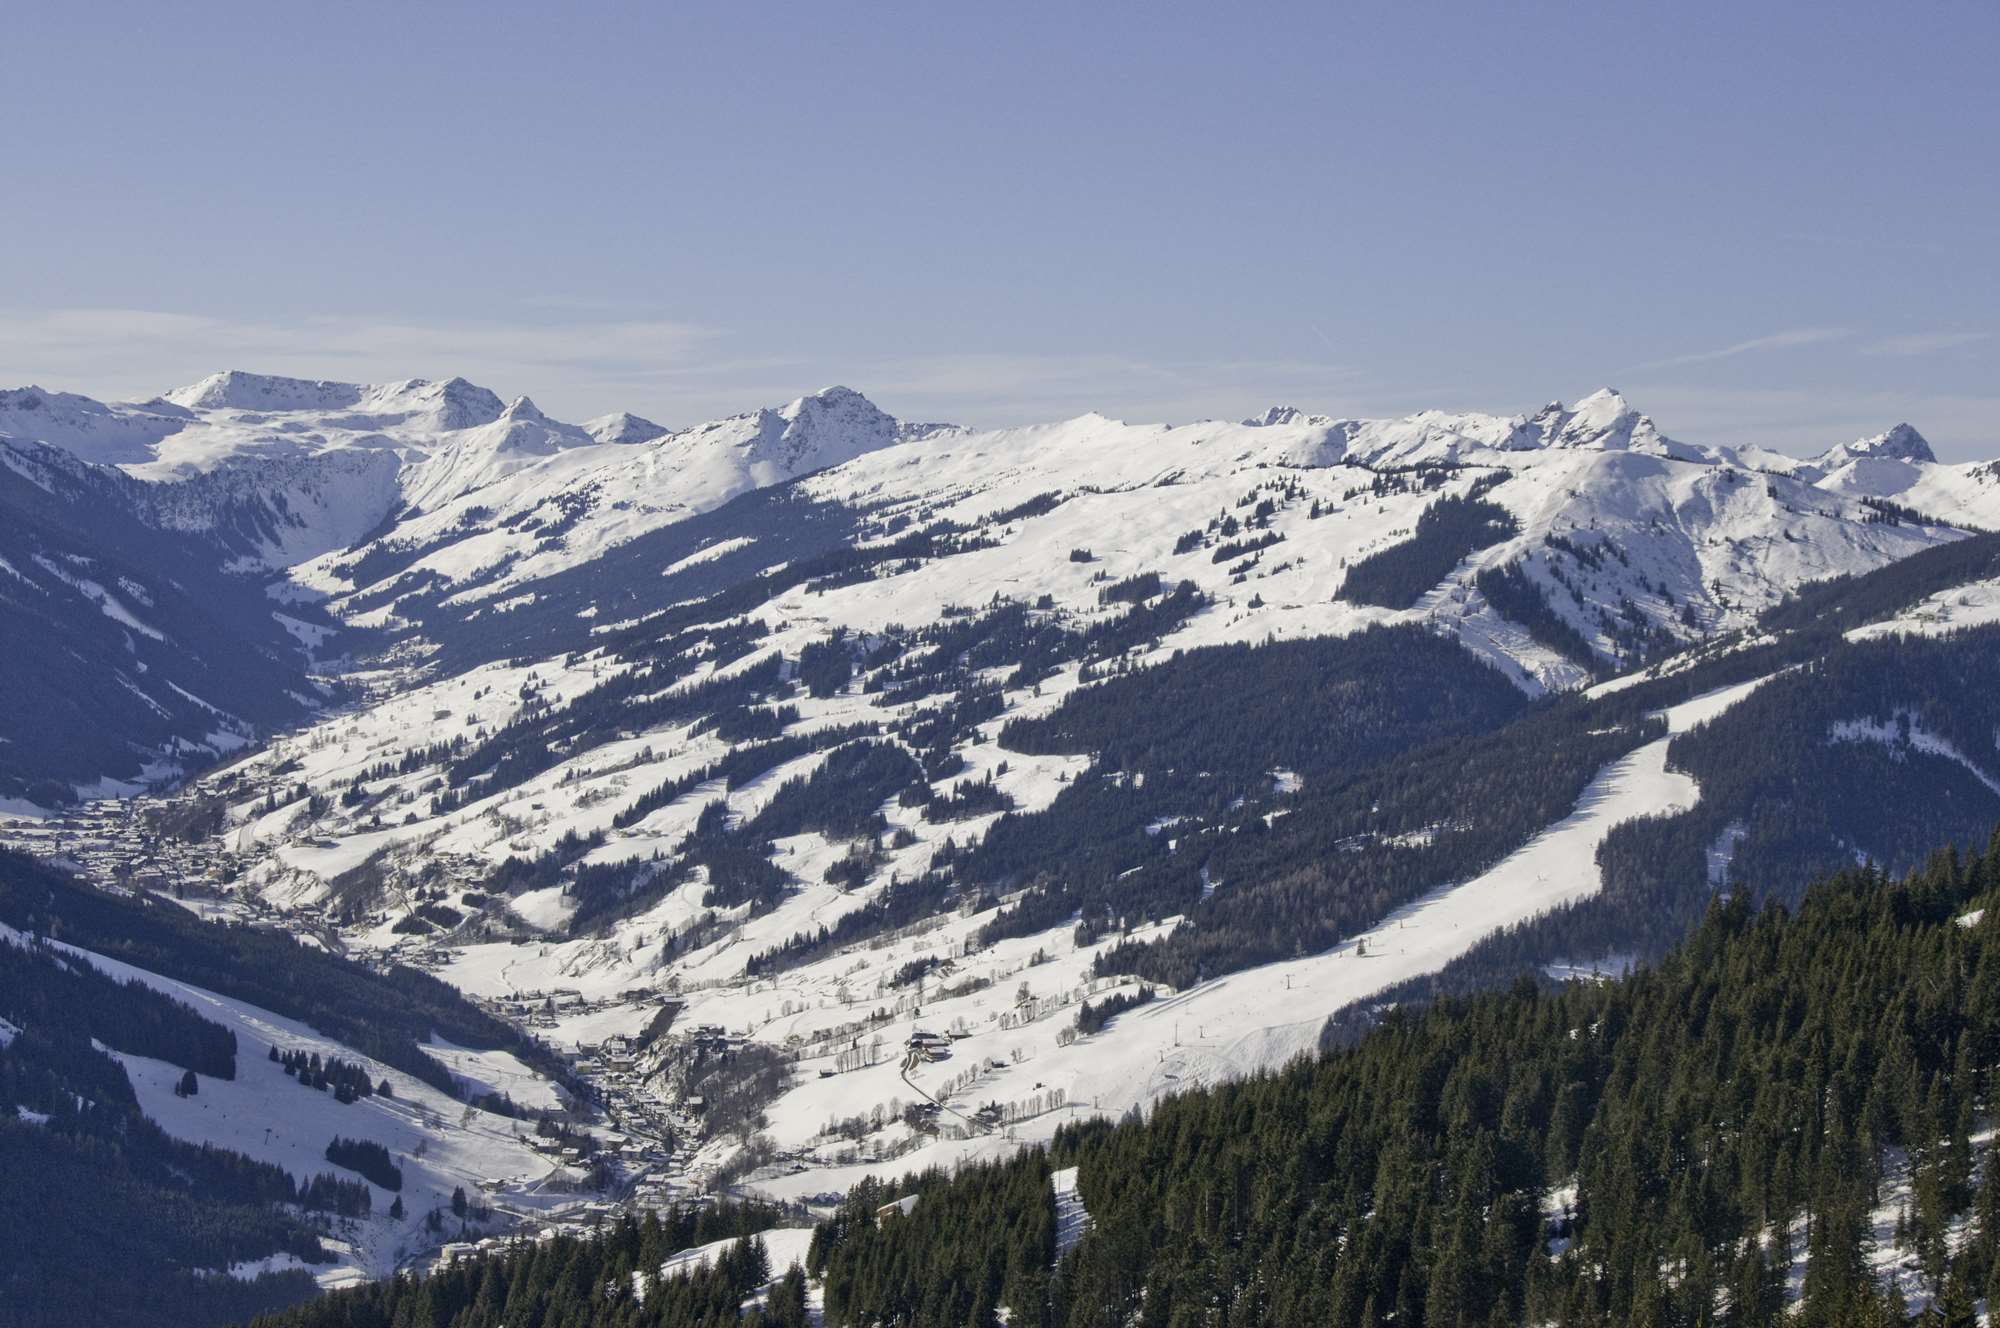 View of the Saalbach valley